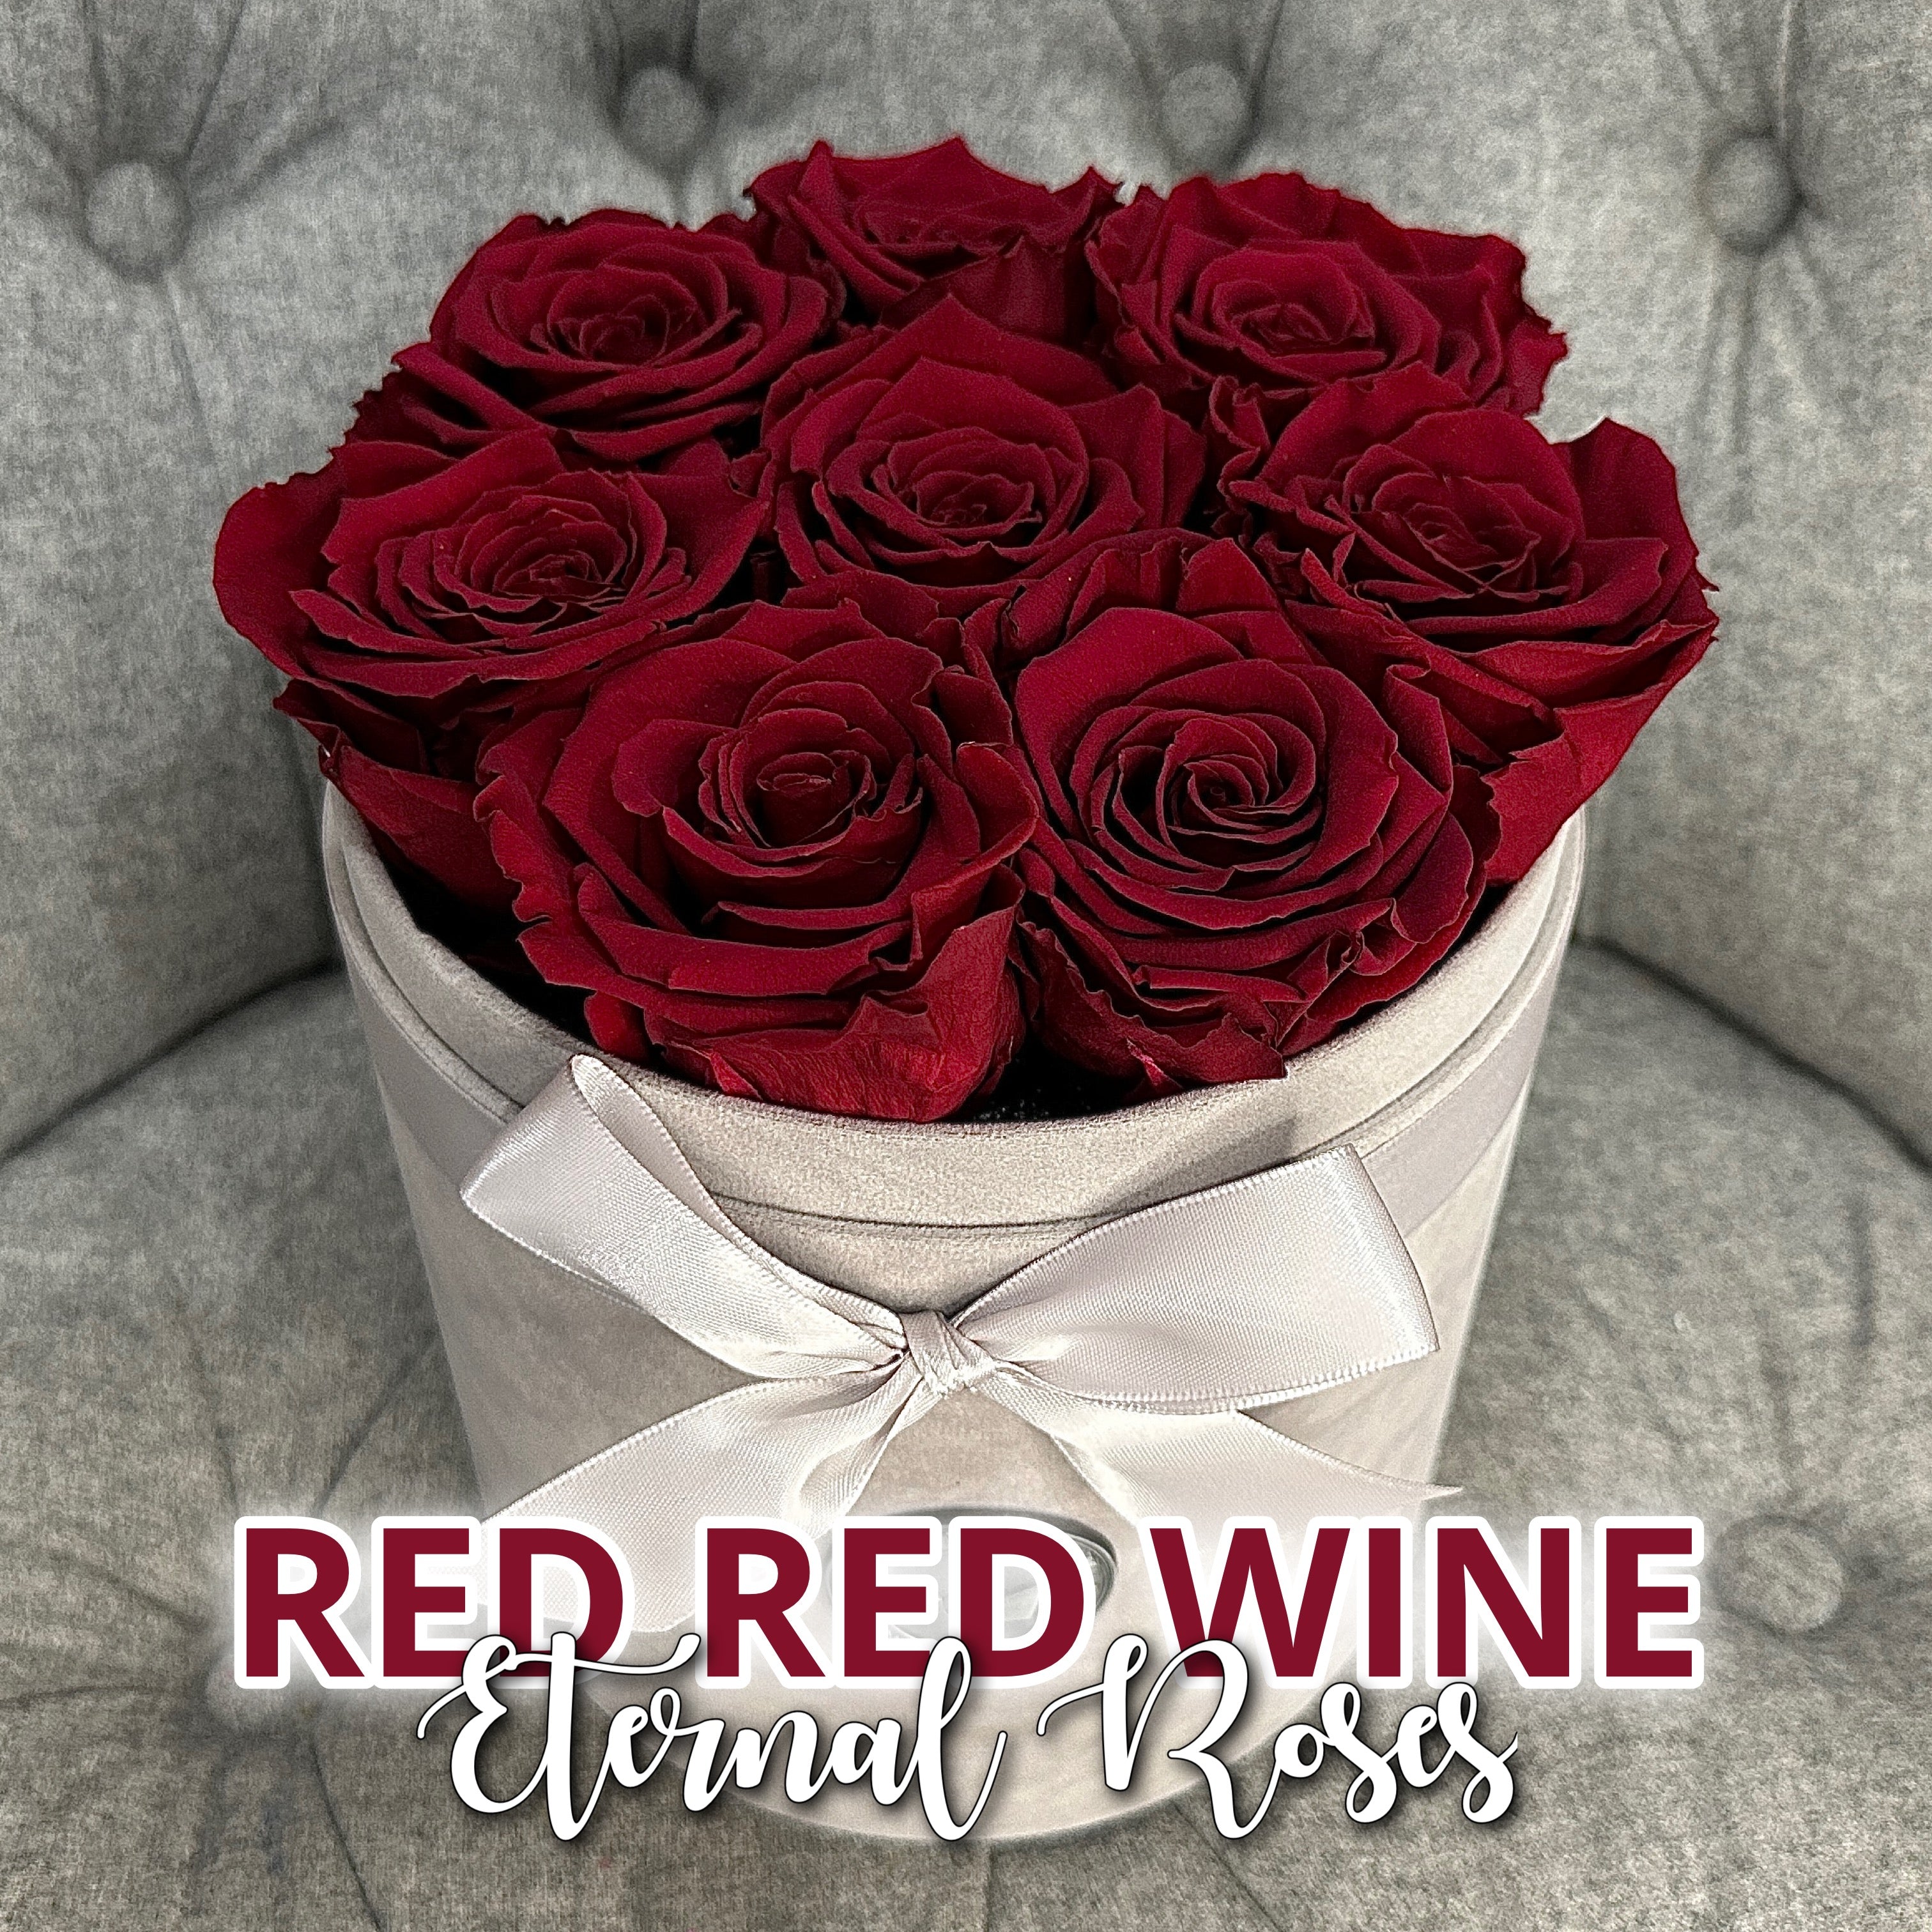 RED RED WINE ROSES